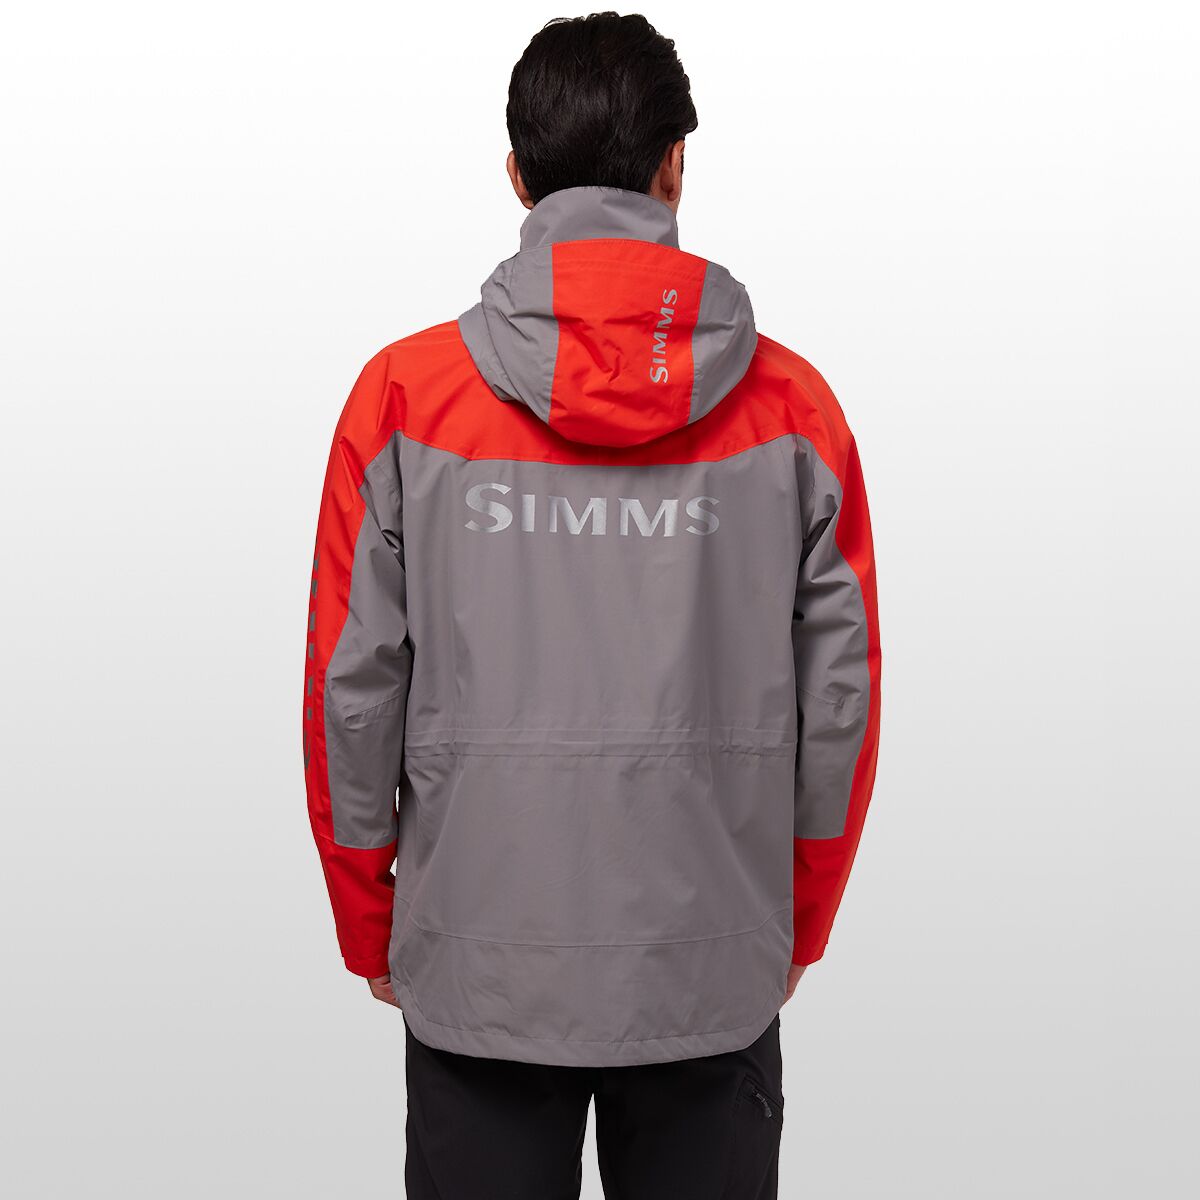 Simms Men's CBP Tech Hoody: Ideal for saltwater fly fishing — Red's Fly Shop